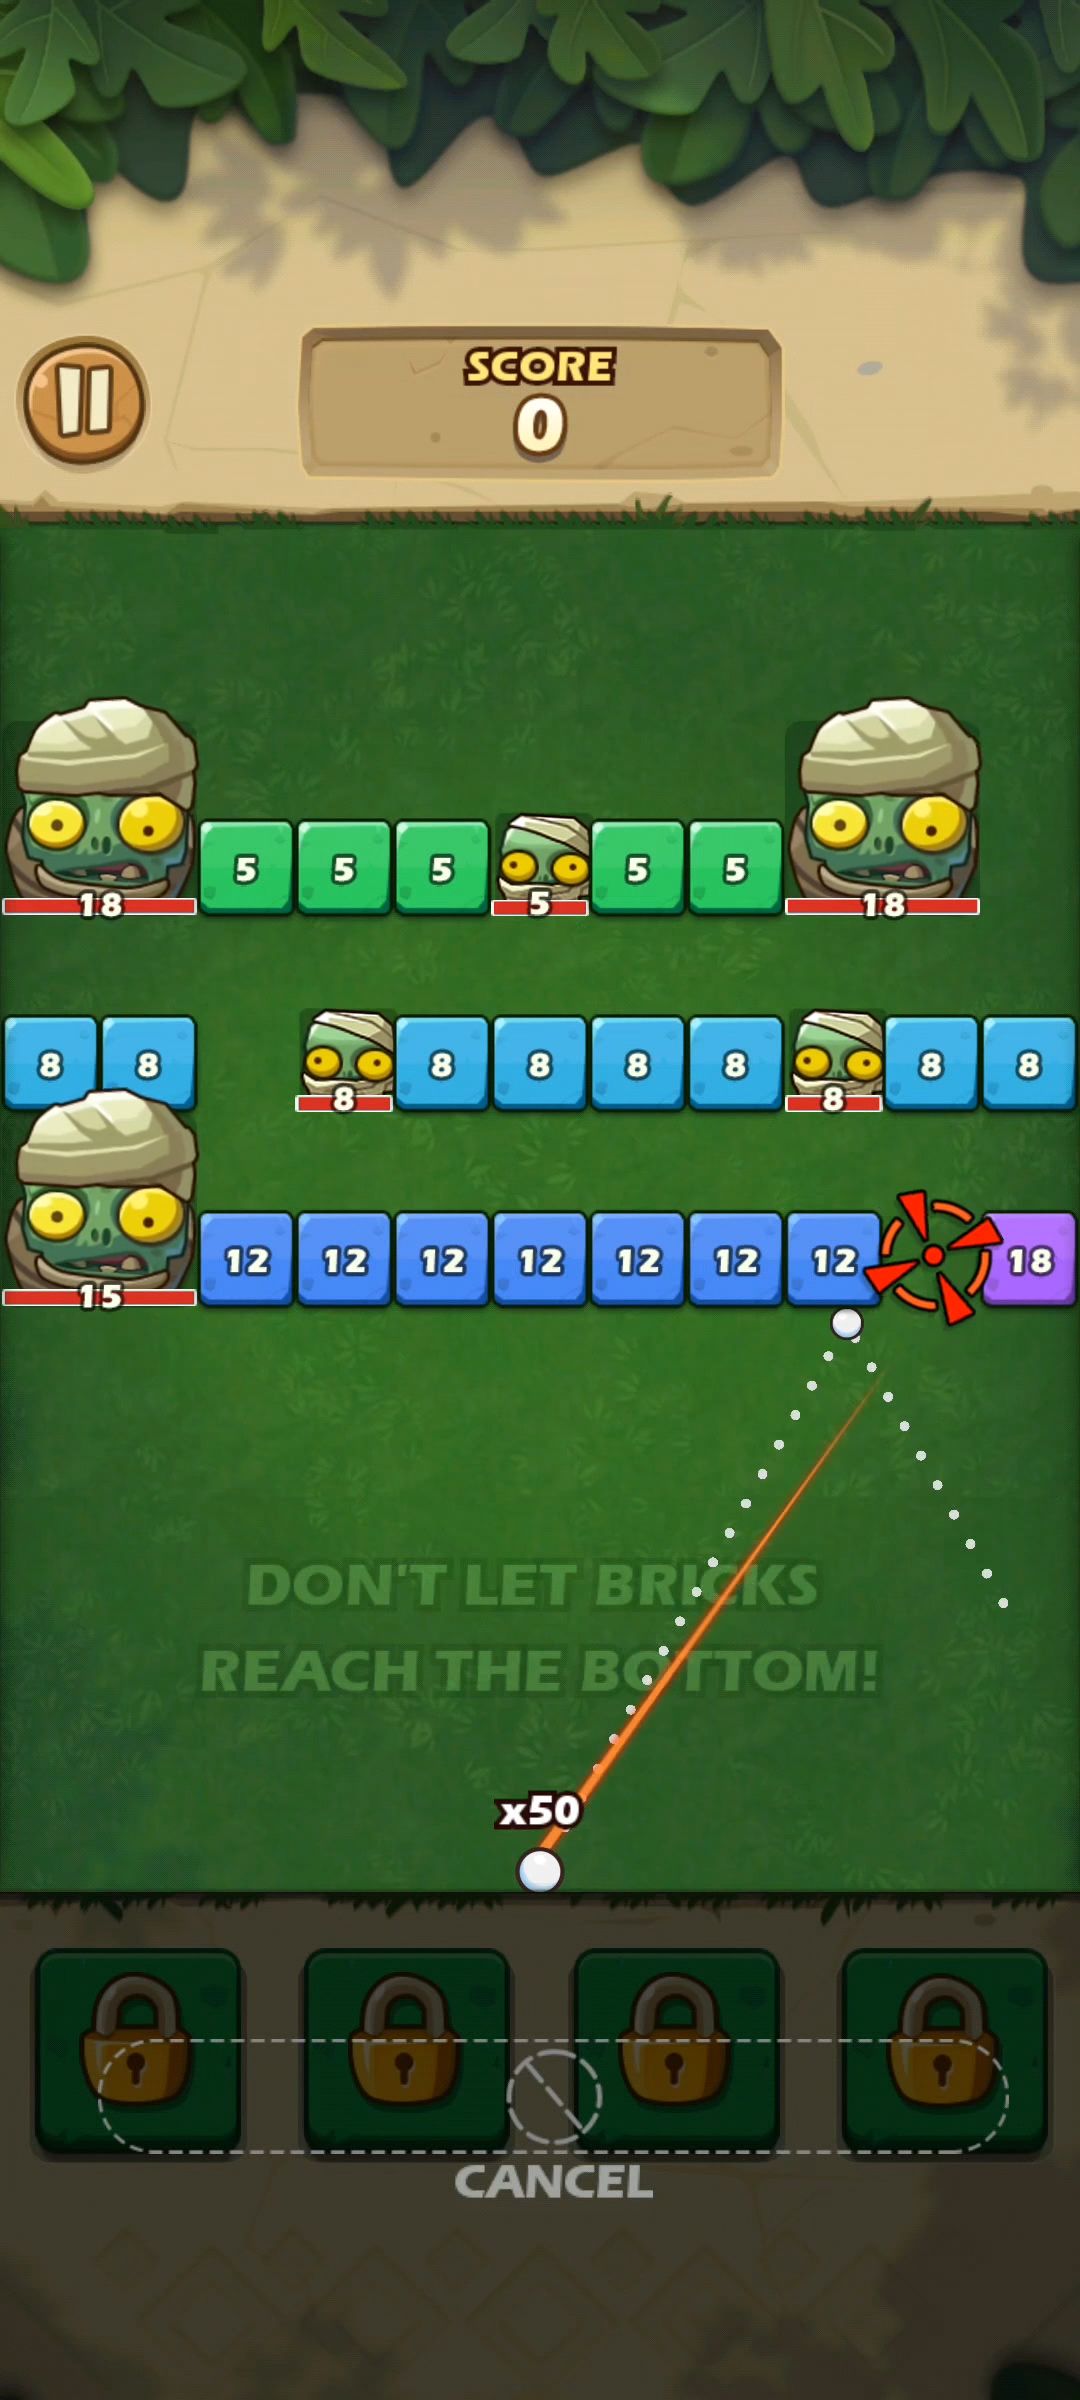 Download Breaker Fun 2: Zombie Brick Android free game.